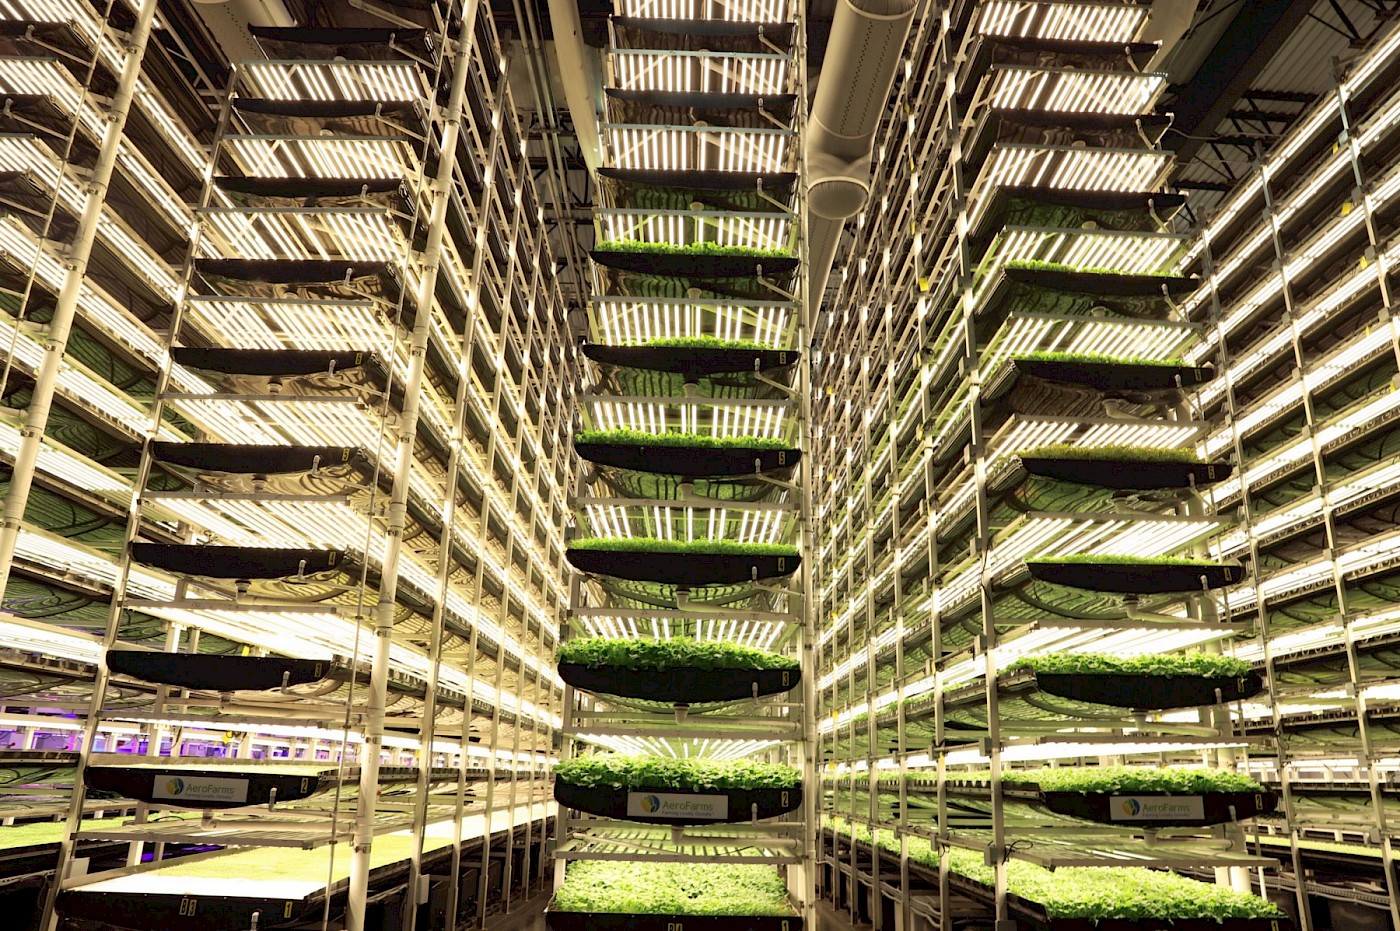 AeroFarms. [Source](https://aerofarms.com/2019/02/20/aerofarms-is-on-a-mission-to-grow-the-best-plants-possible-for-the-betterment-of-humanity/)